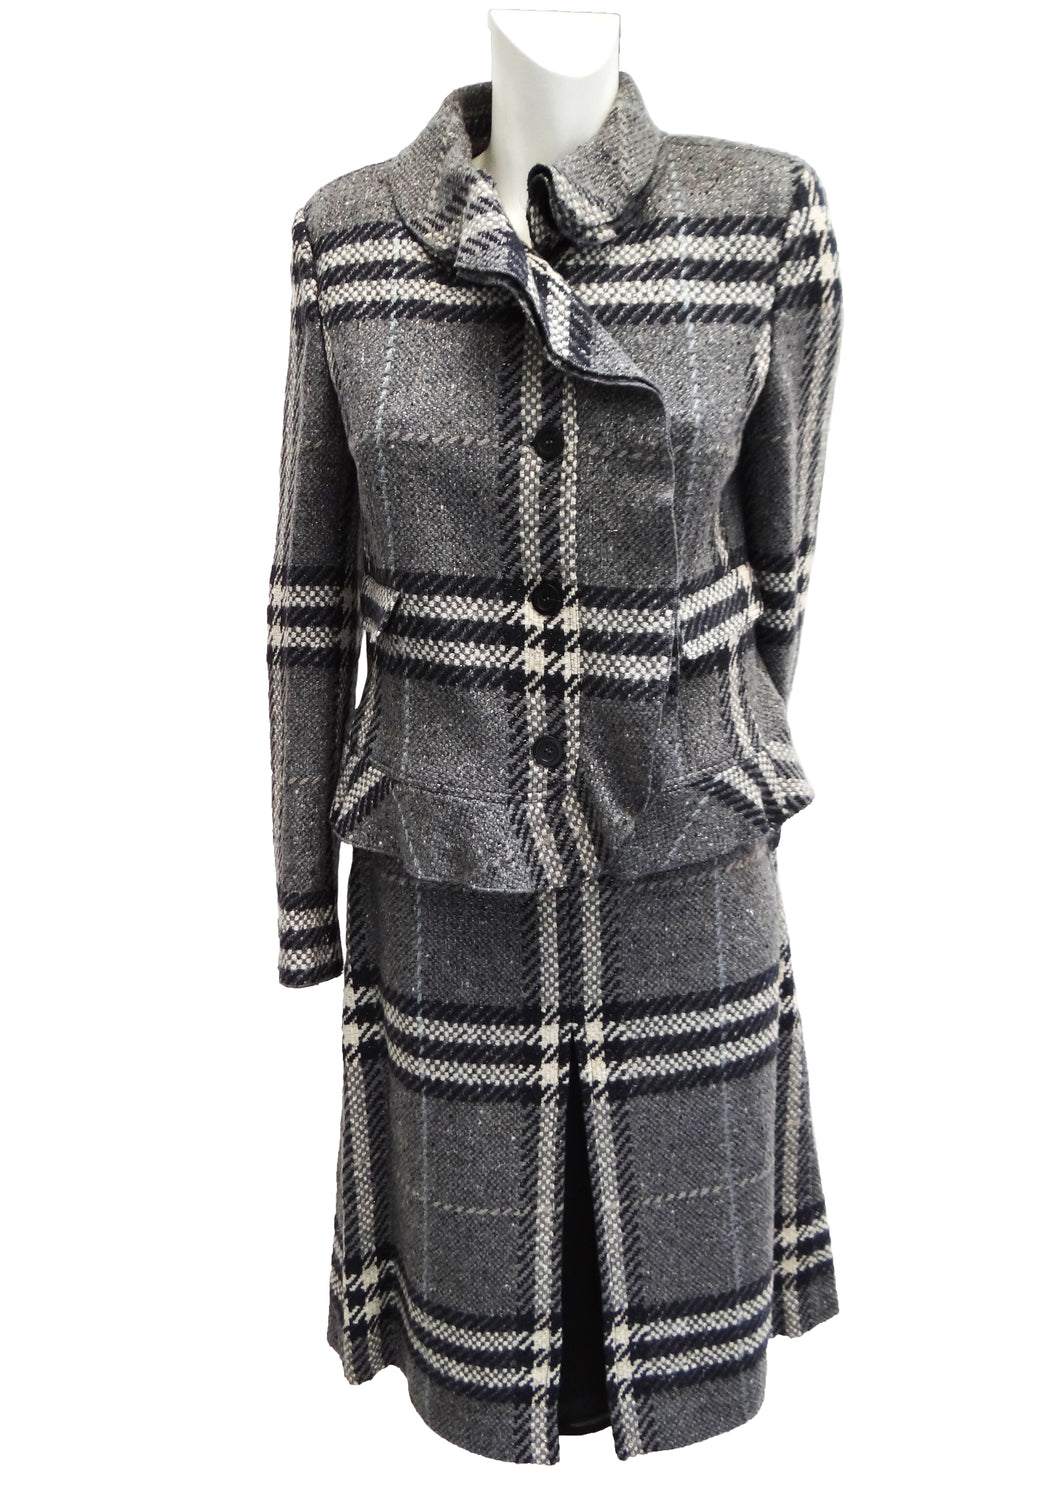 Burberry Tailored Skirt Suit in Grey Check Weave with Silver Thread, U –  Menage Modern Vintage